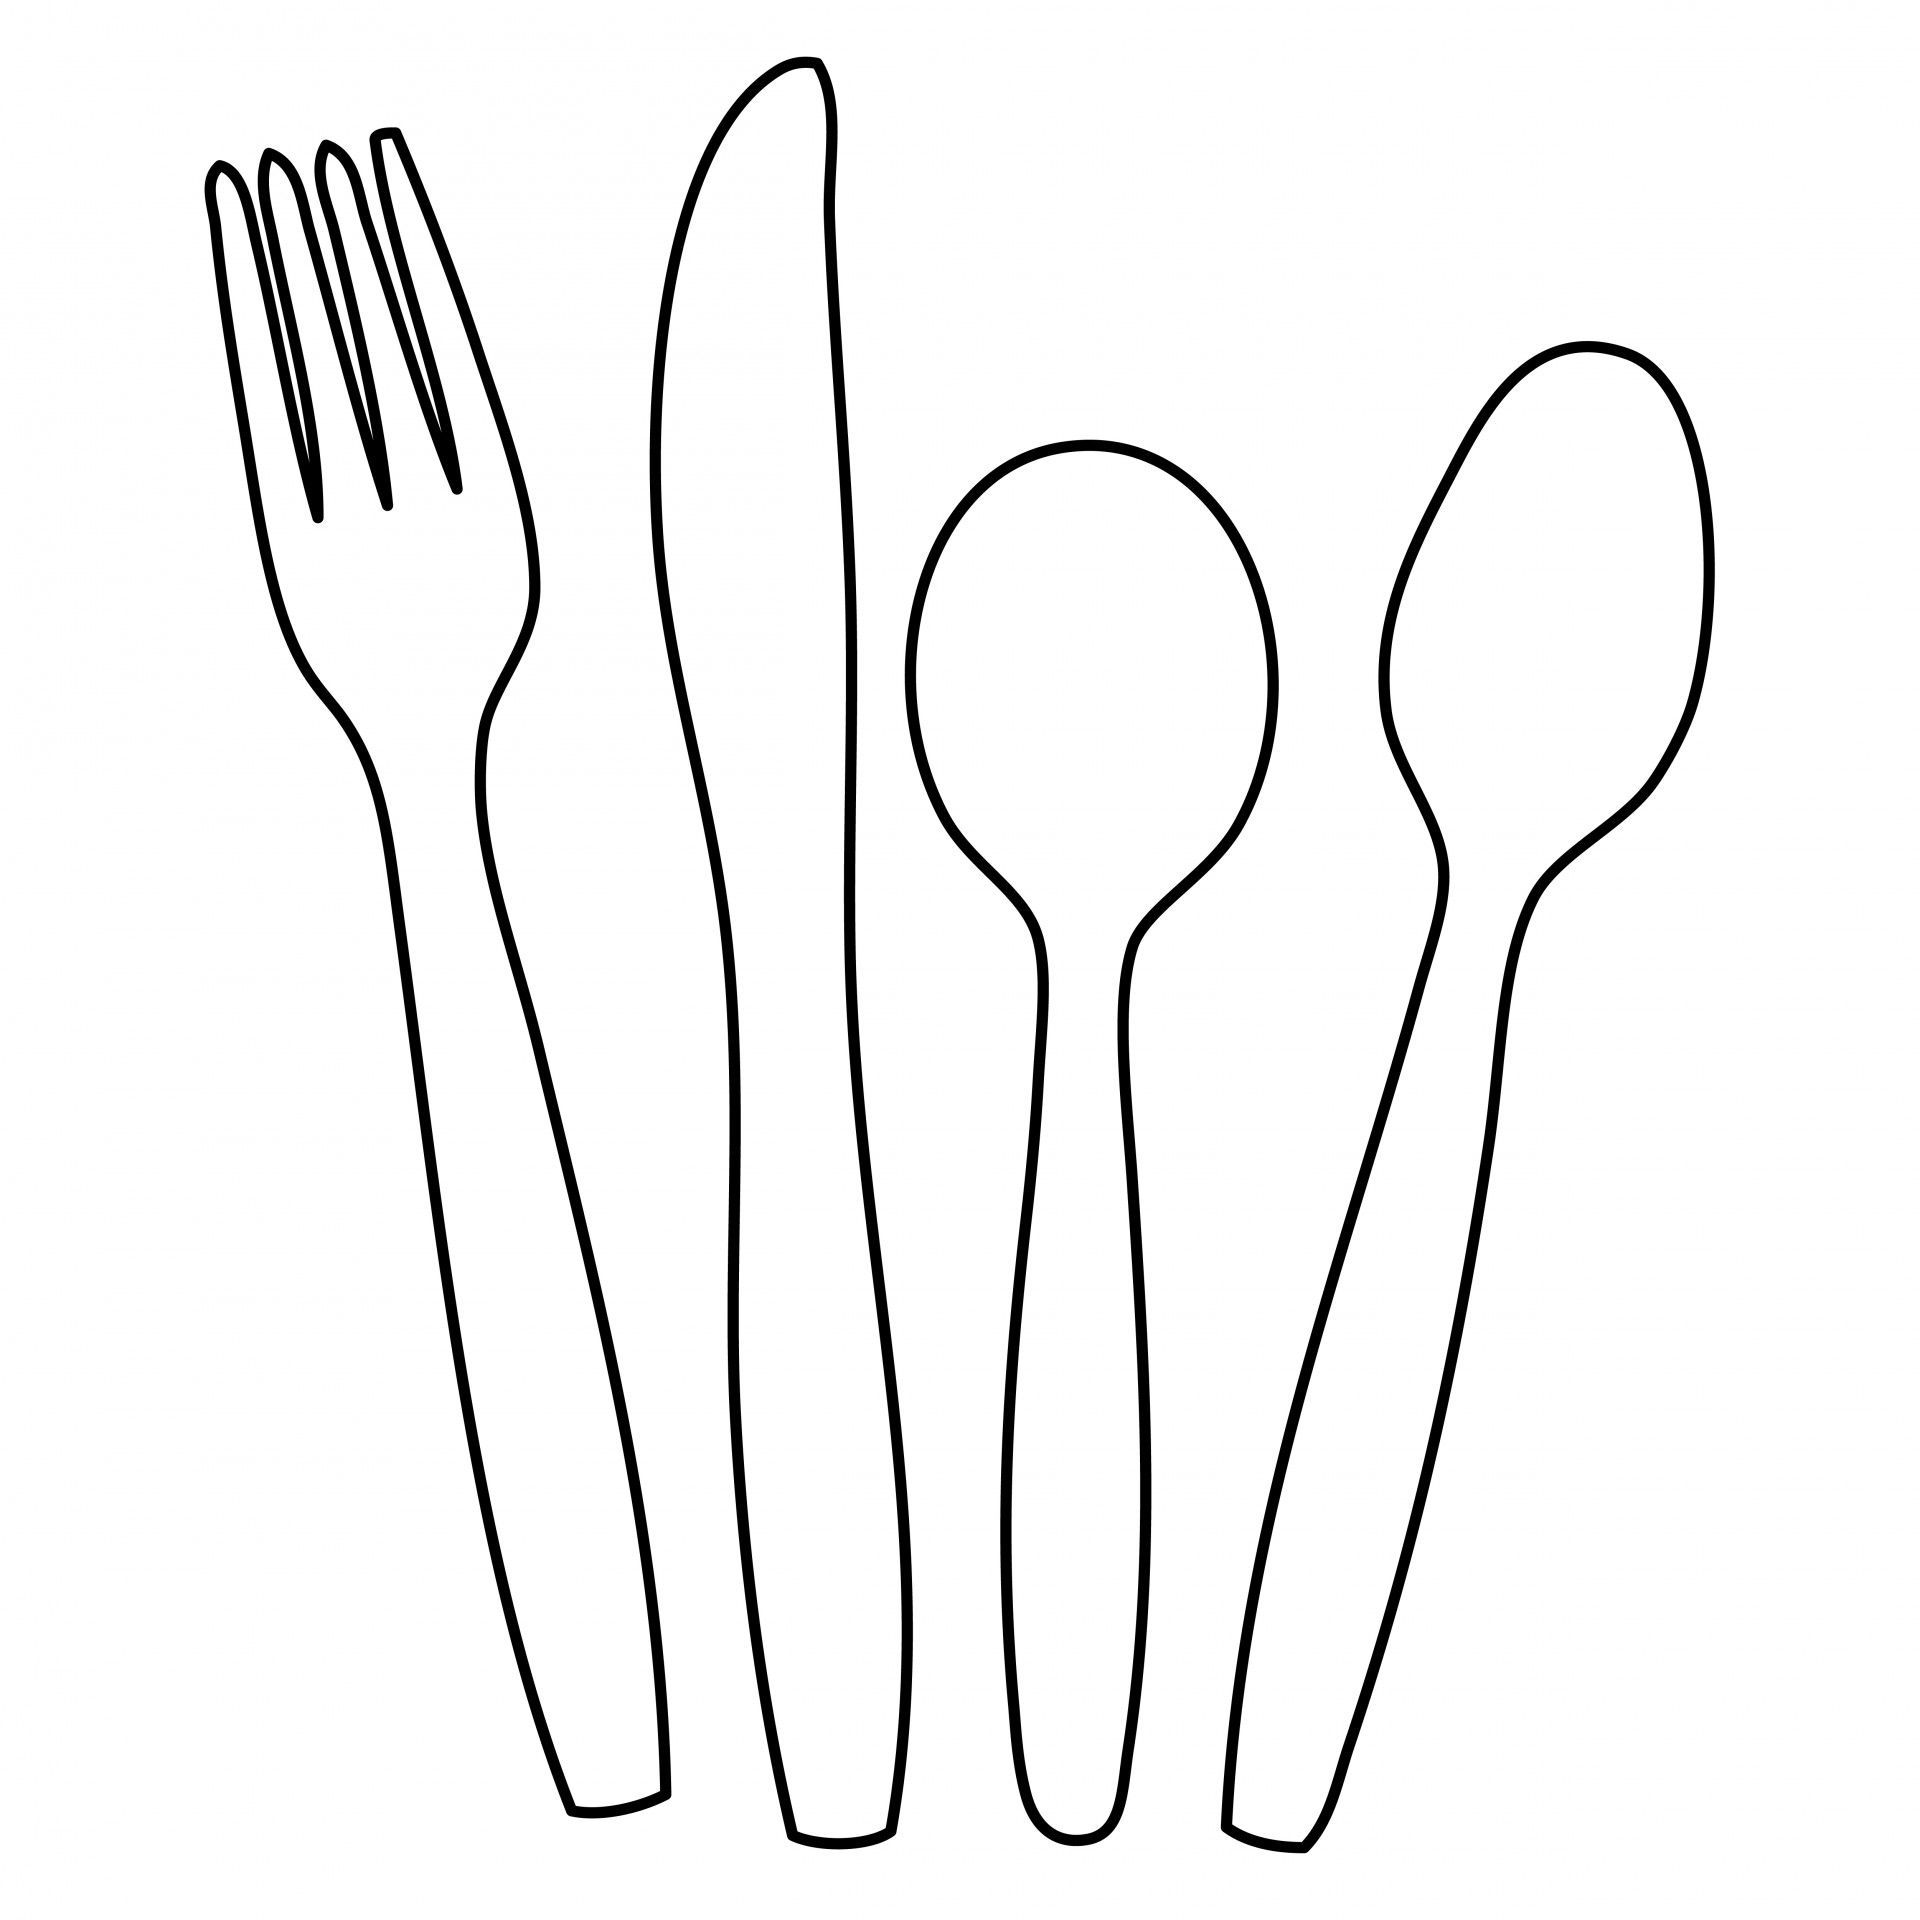 Cutlery outline clipart.